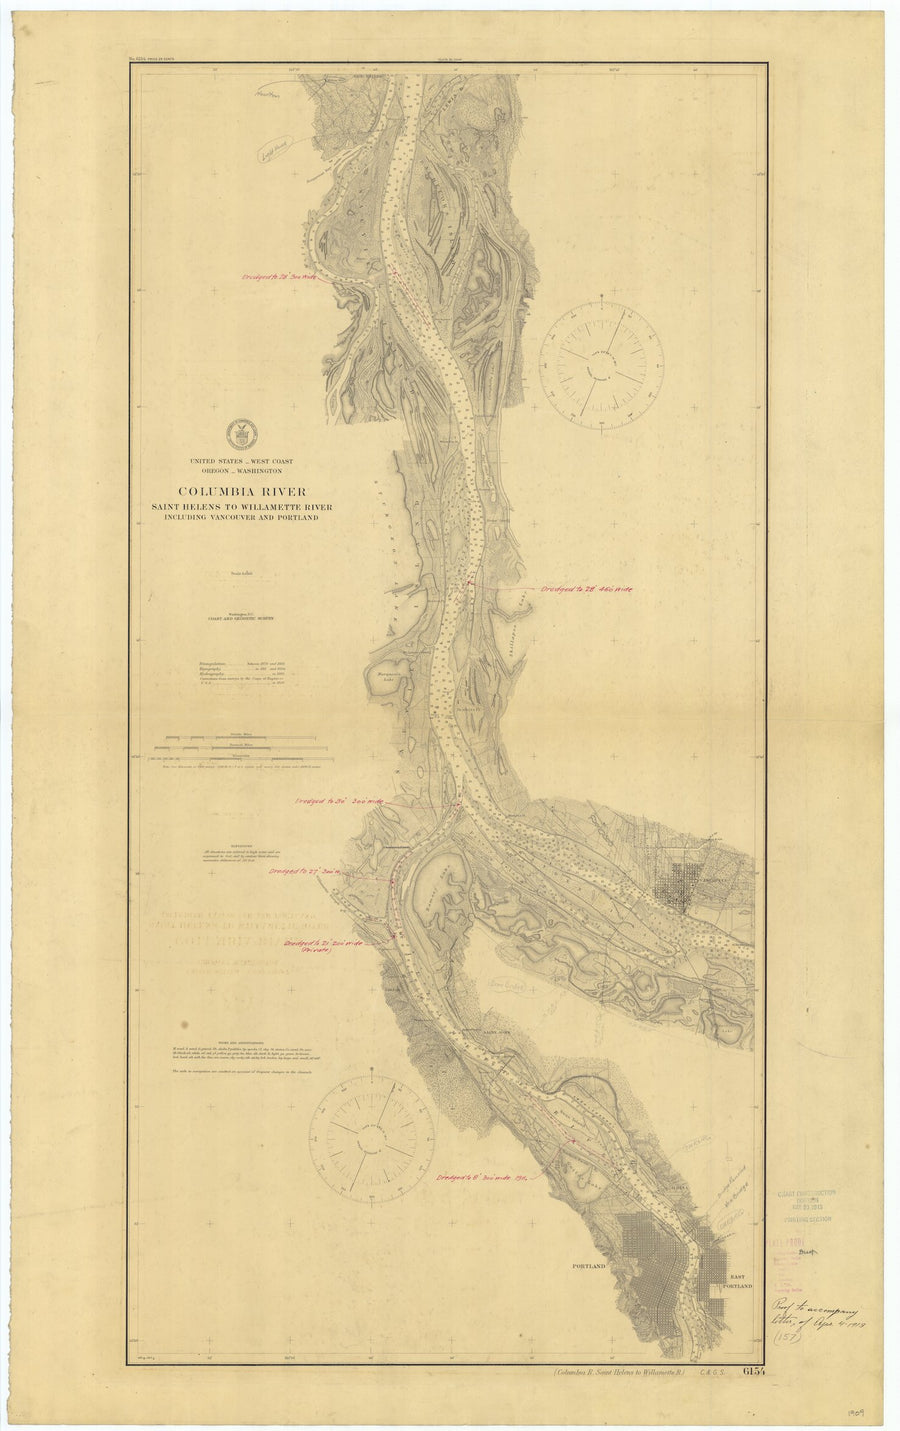 Columbia River Map - St. Helens to Willamette River -1909